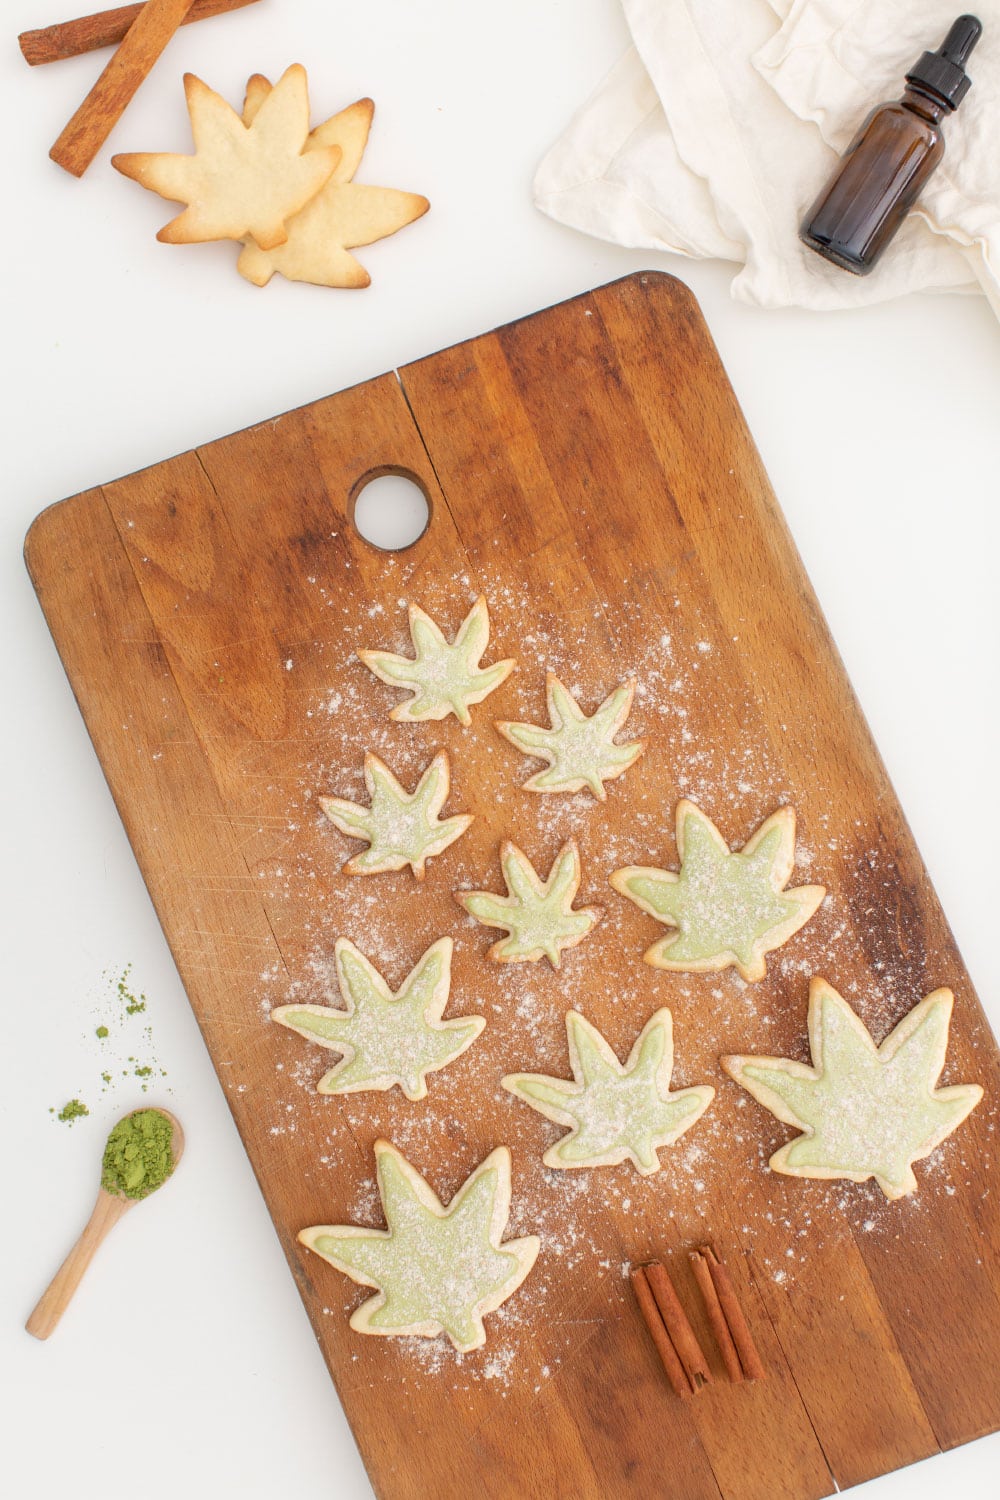 Marijuana pot shaped leaf sugar cookies infused with cbd oil, with green icing from matcha powder and flour on wooden cutting board surface, shaped into a Christmas tree.